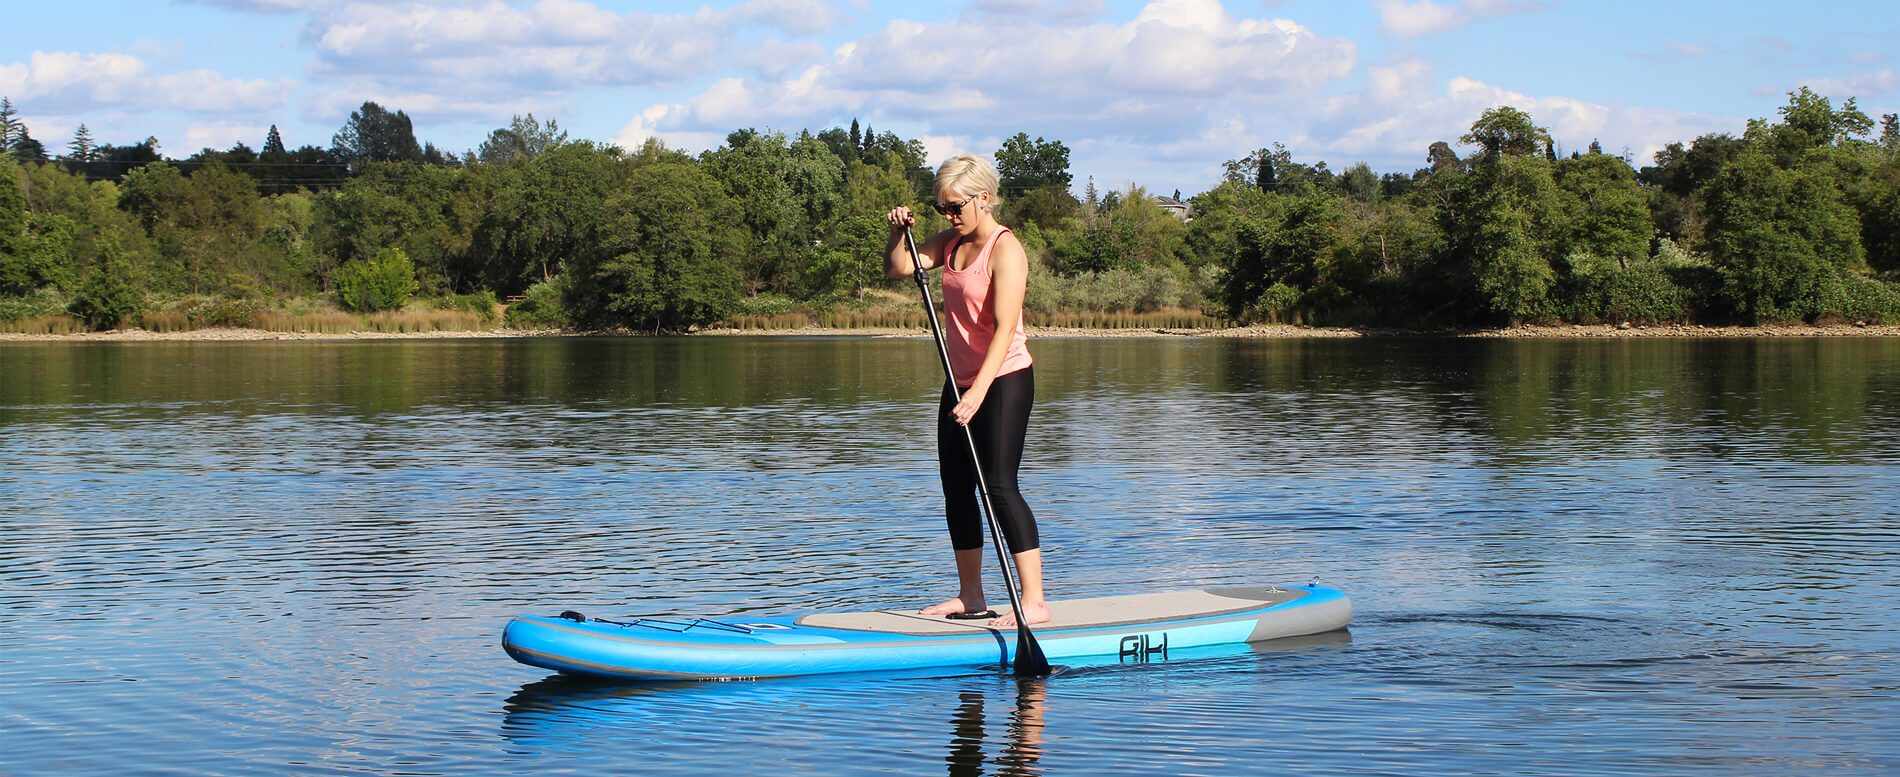 Is Paddle Boarding Hard?